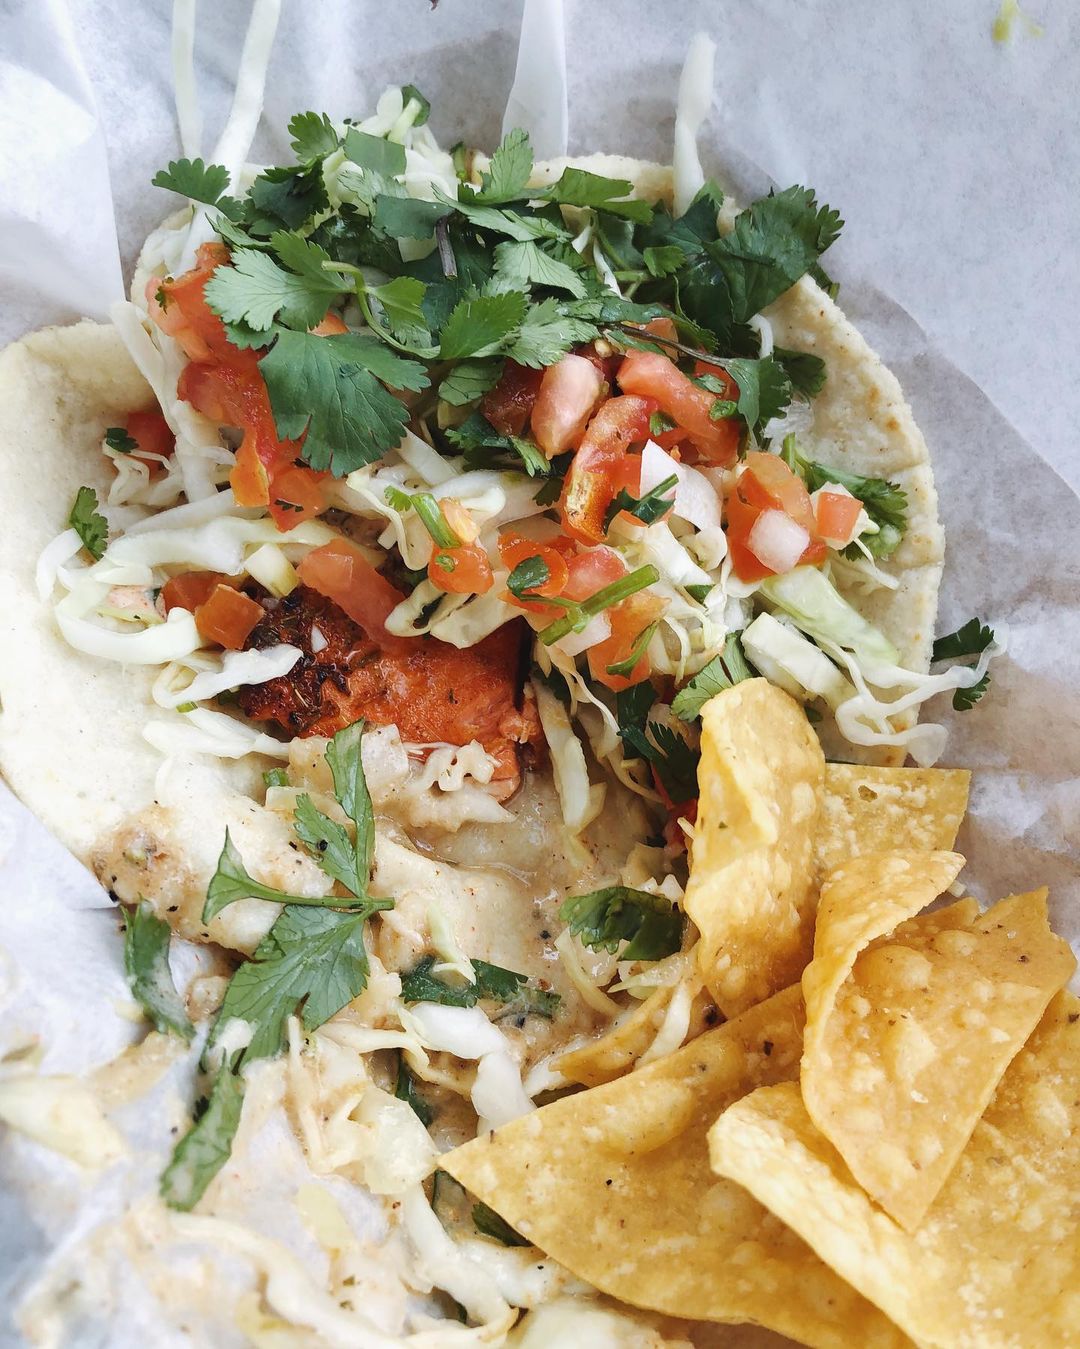 10 Mexican Restaurants to Try in Laguna Beach